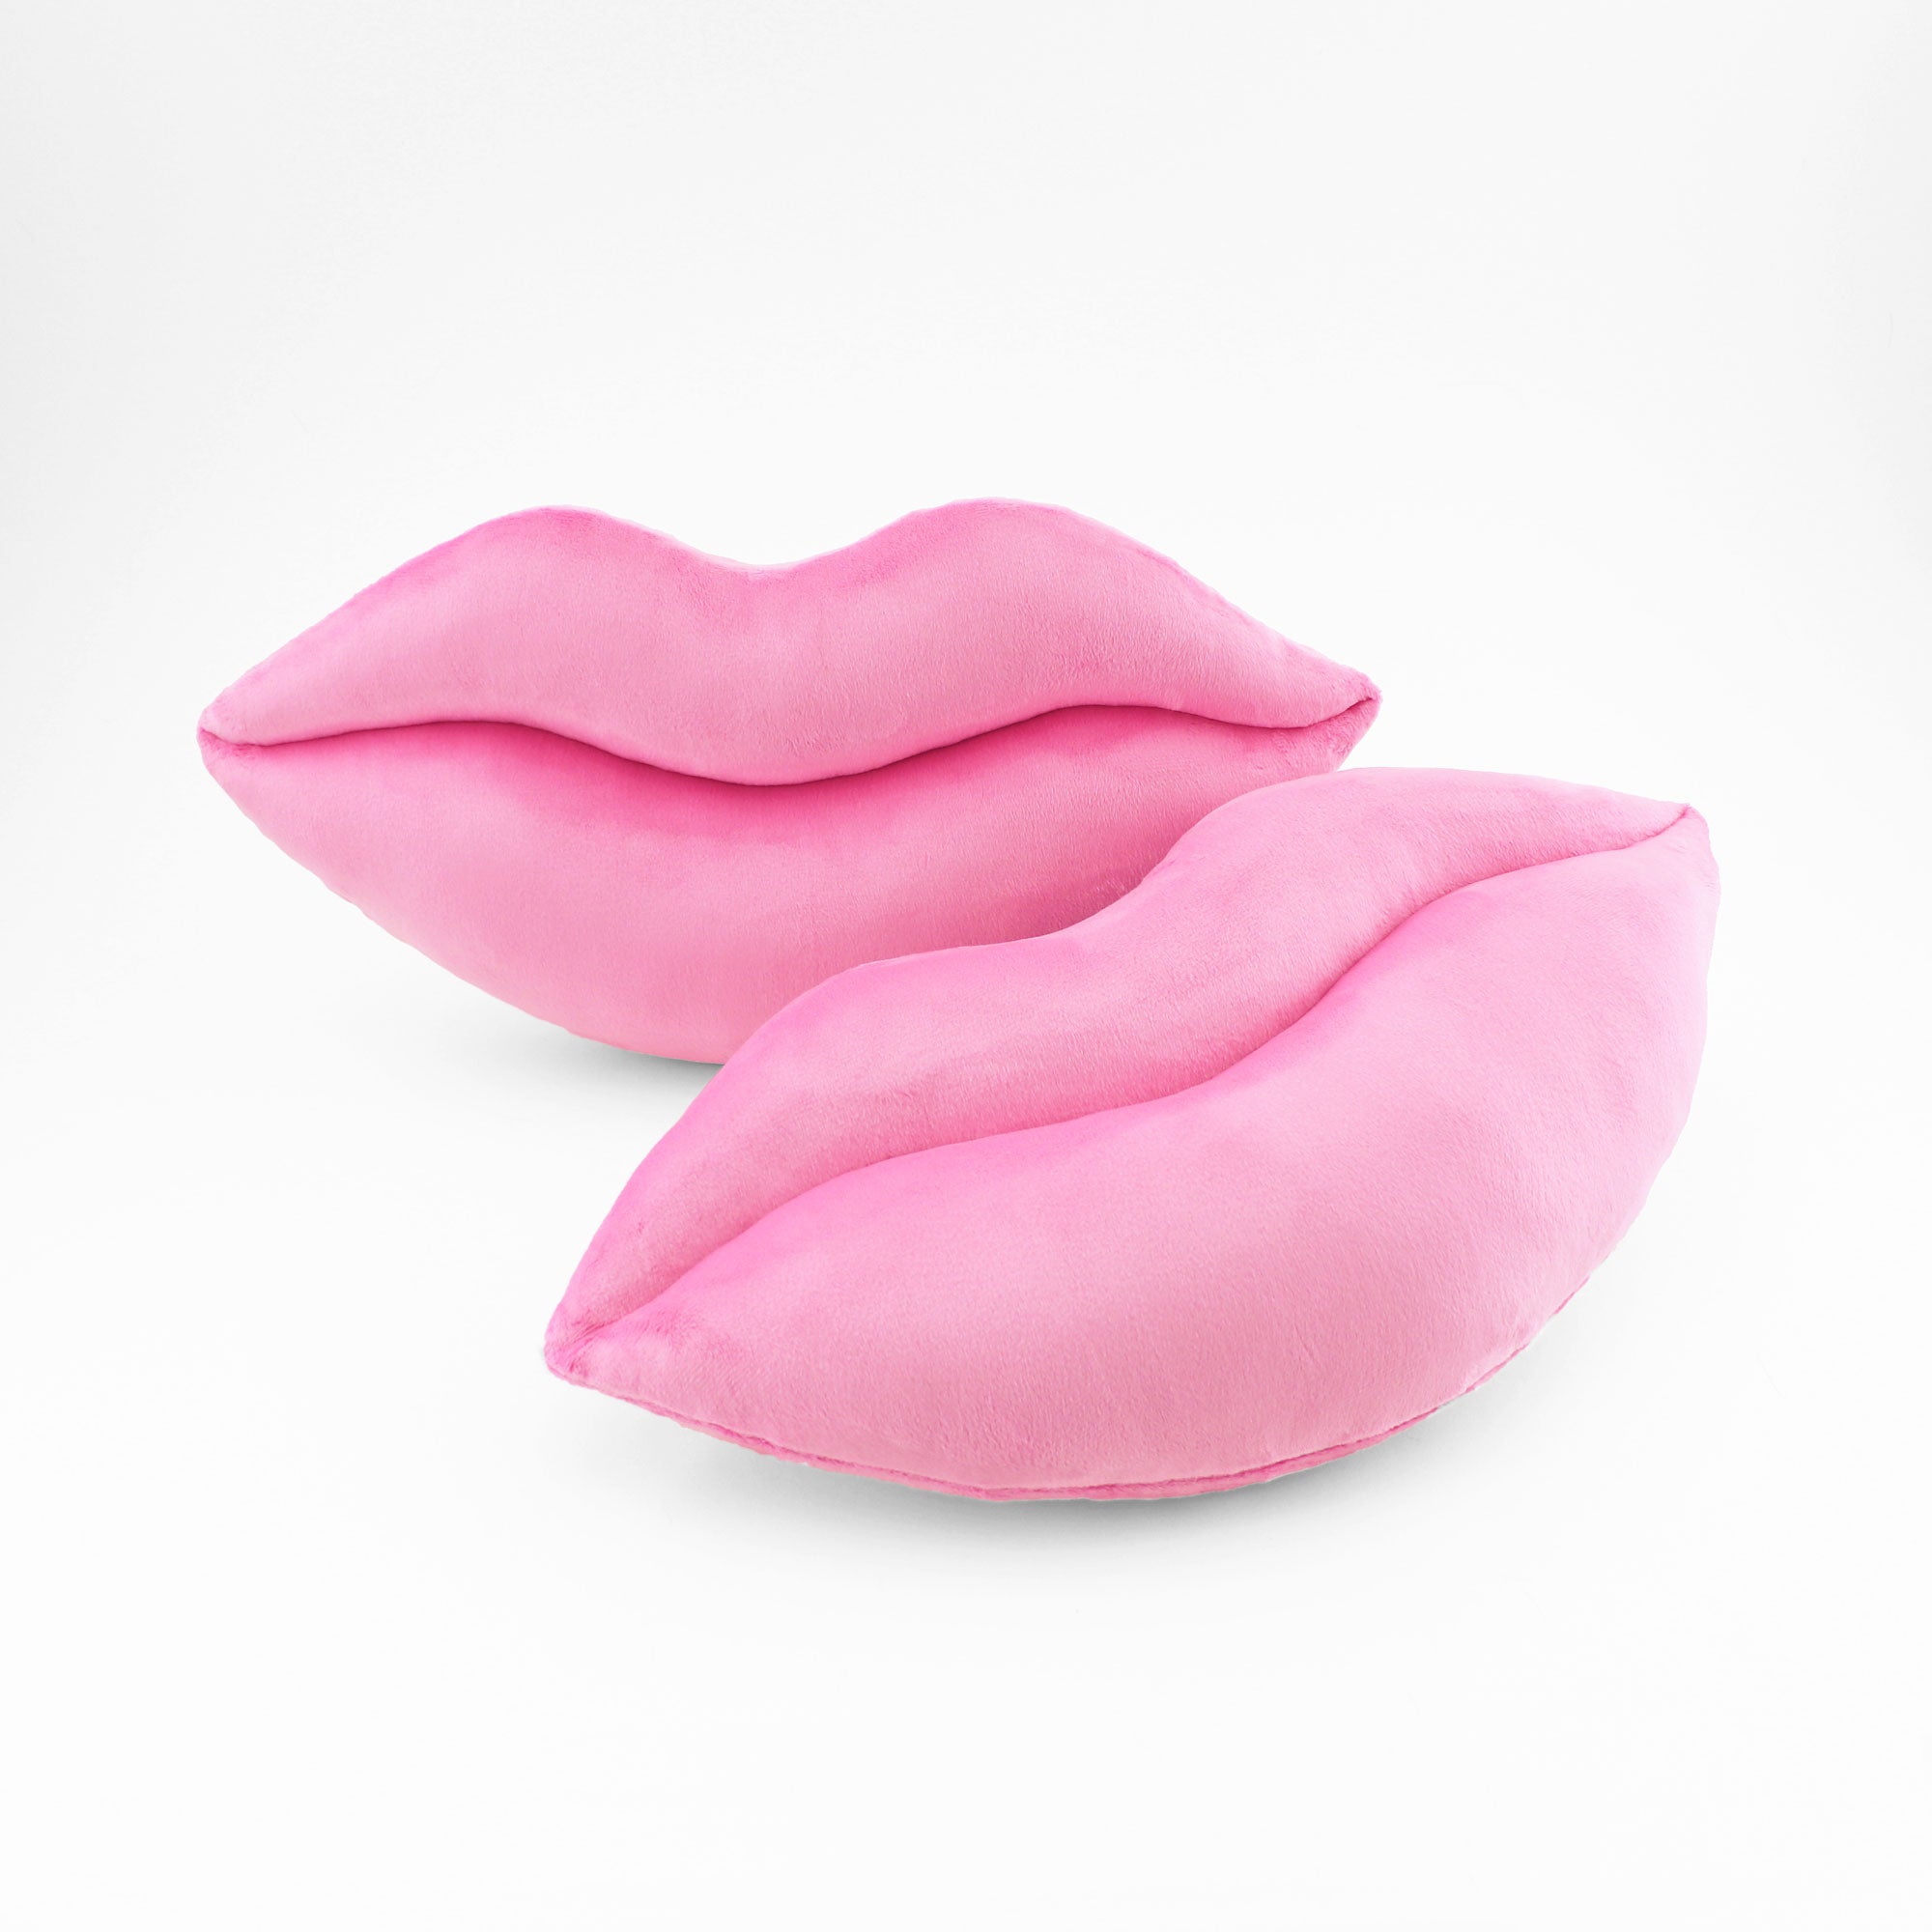 A pair of Bubble Gum Pink lips shaped decorative pillows.